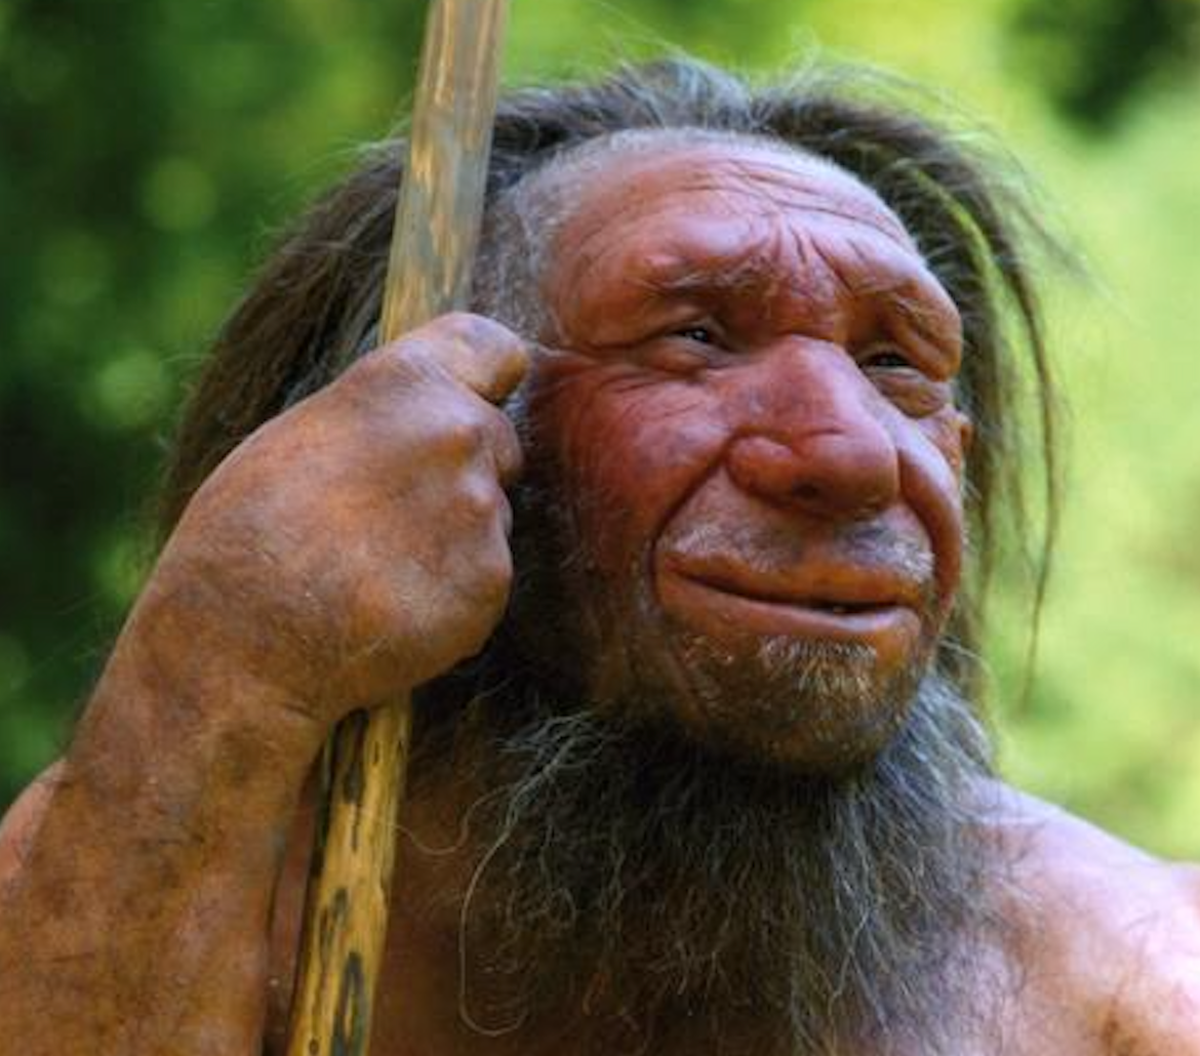 Neanderthals might have lived as ‘different human form’ instead of separate species, scientists say 